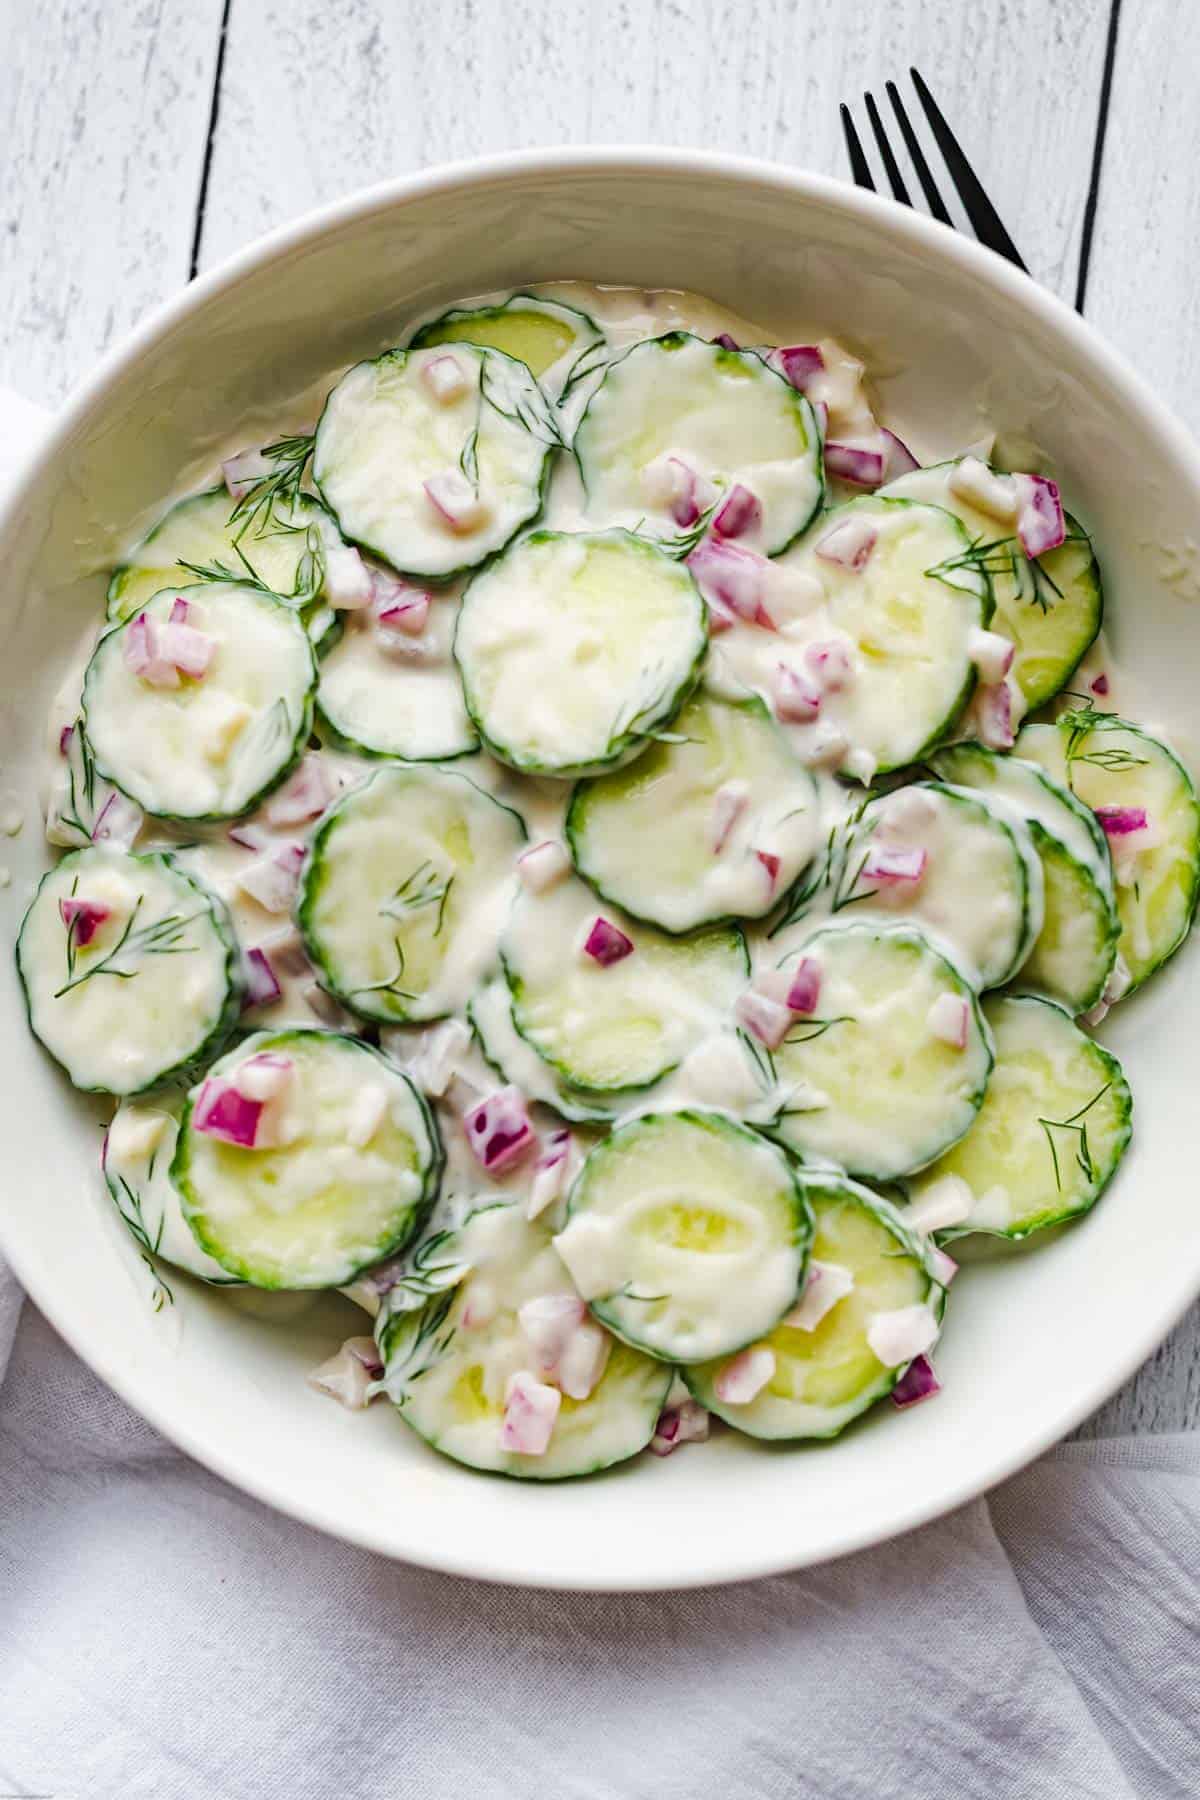 Easy creamy vegan dressing, cucumbers, chopped red onion, and fresh dill in a bowl ready for serving.